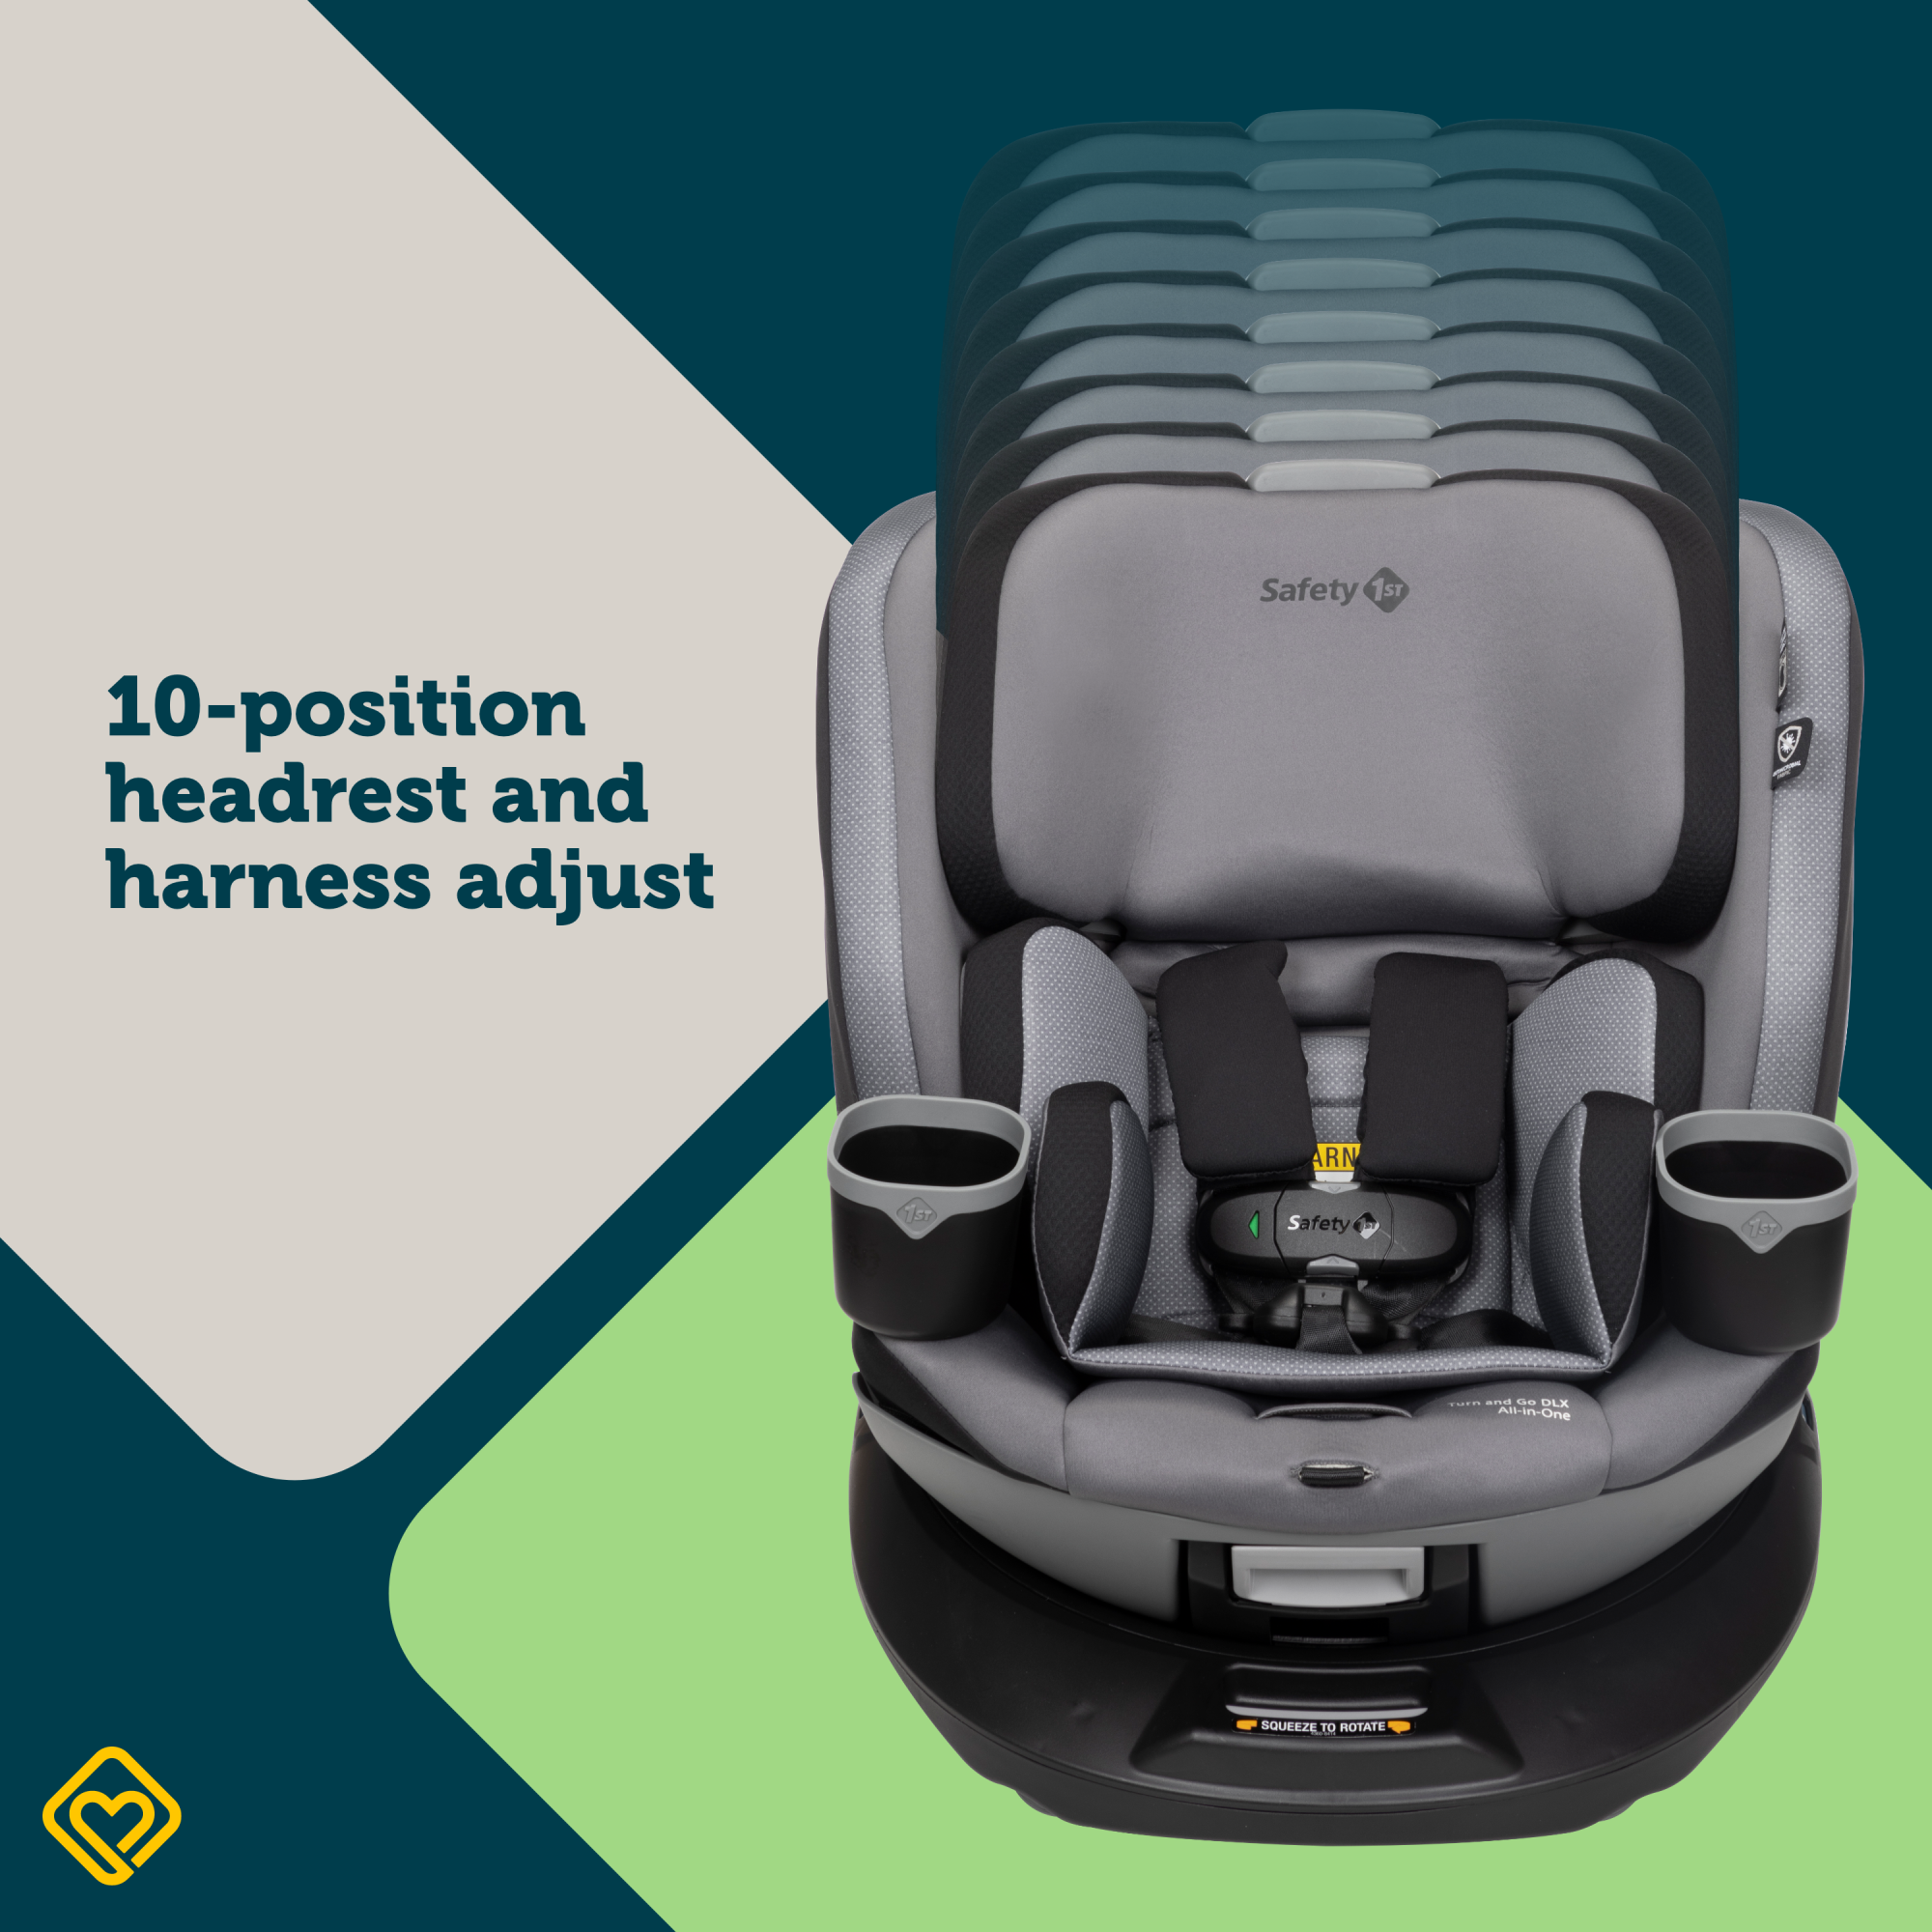 Turn and Go 360 DLX Rotating All-in-One Convertible Car Seat - 10-position headrest and harness adjustment